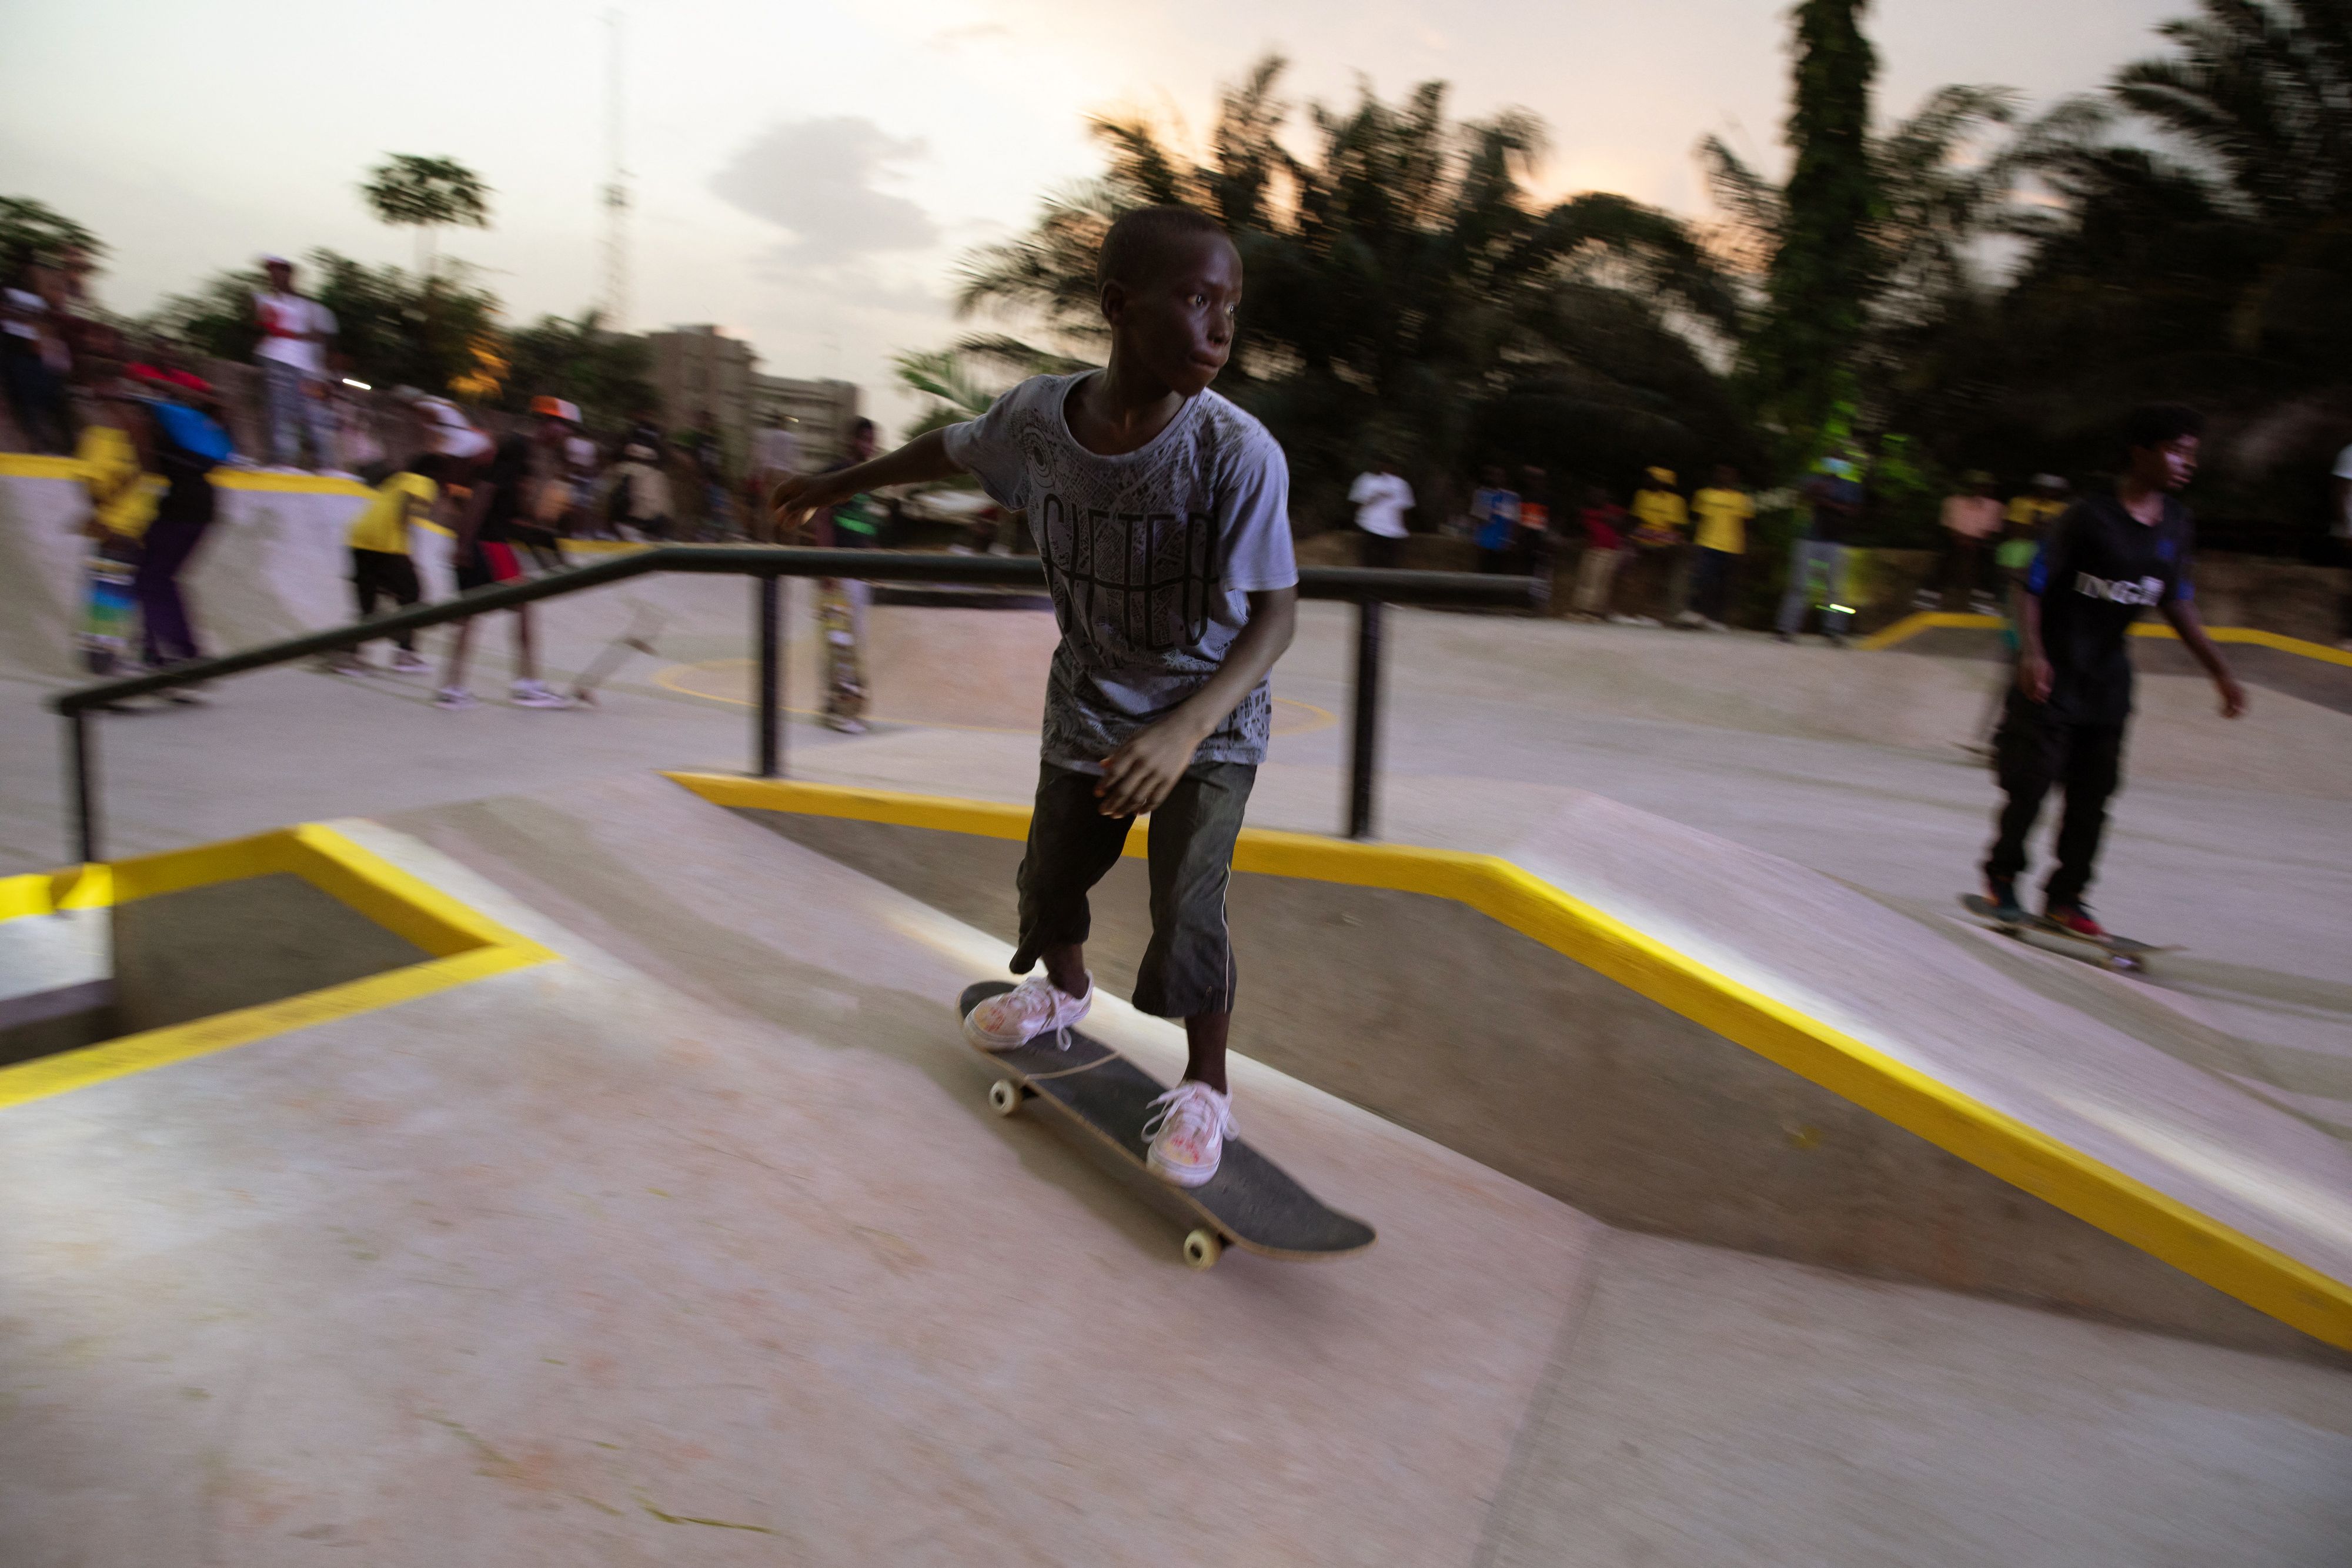 Virgil Abloh and Daily Paper Link Up to Help Bring New Skate Park